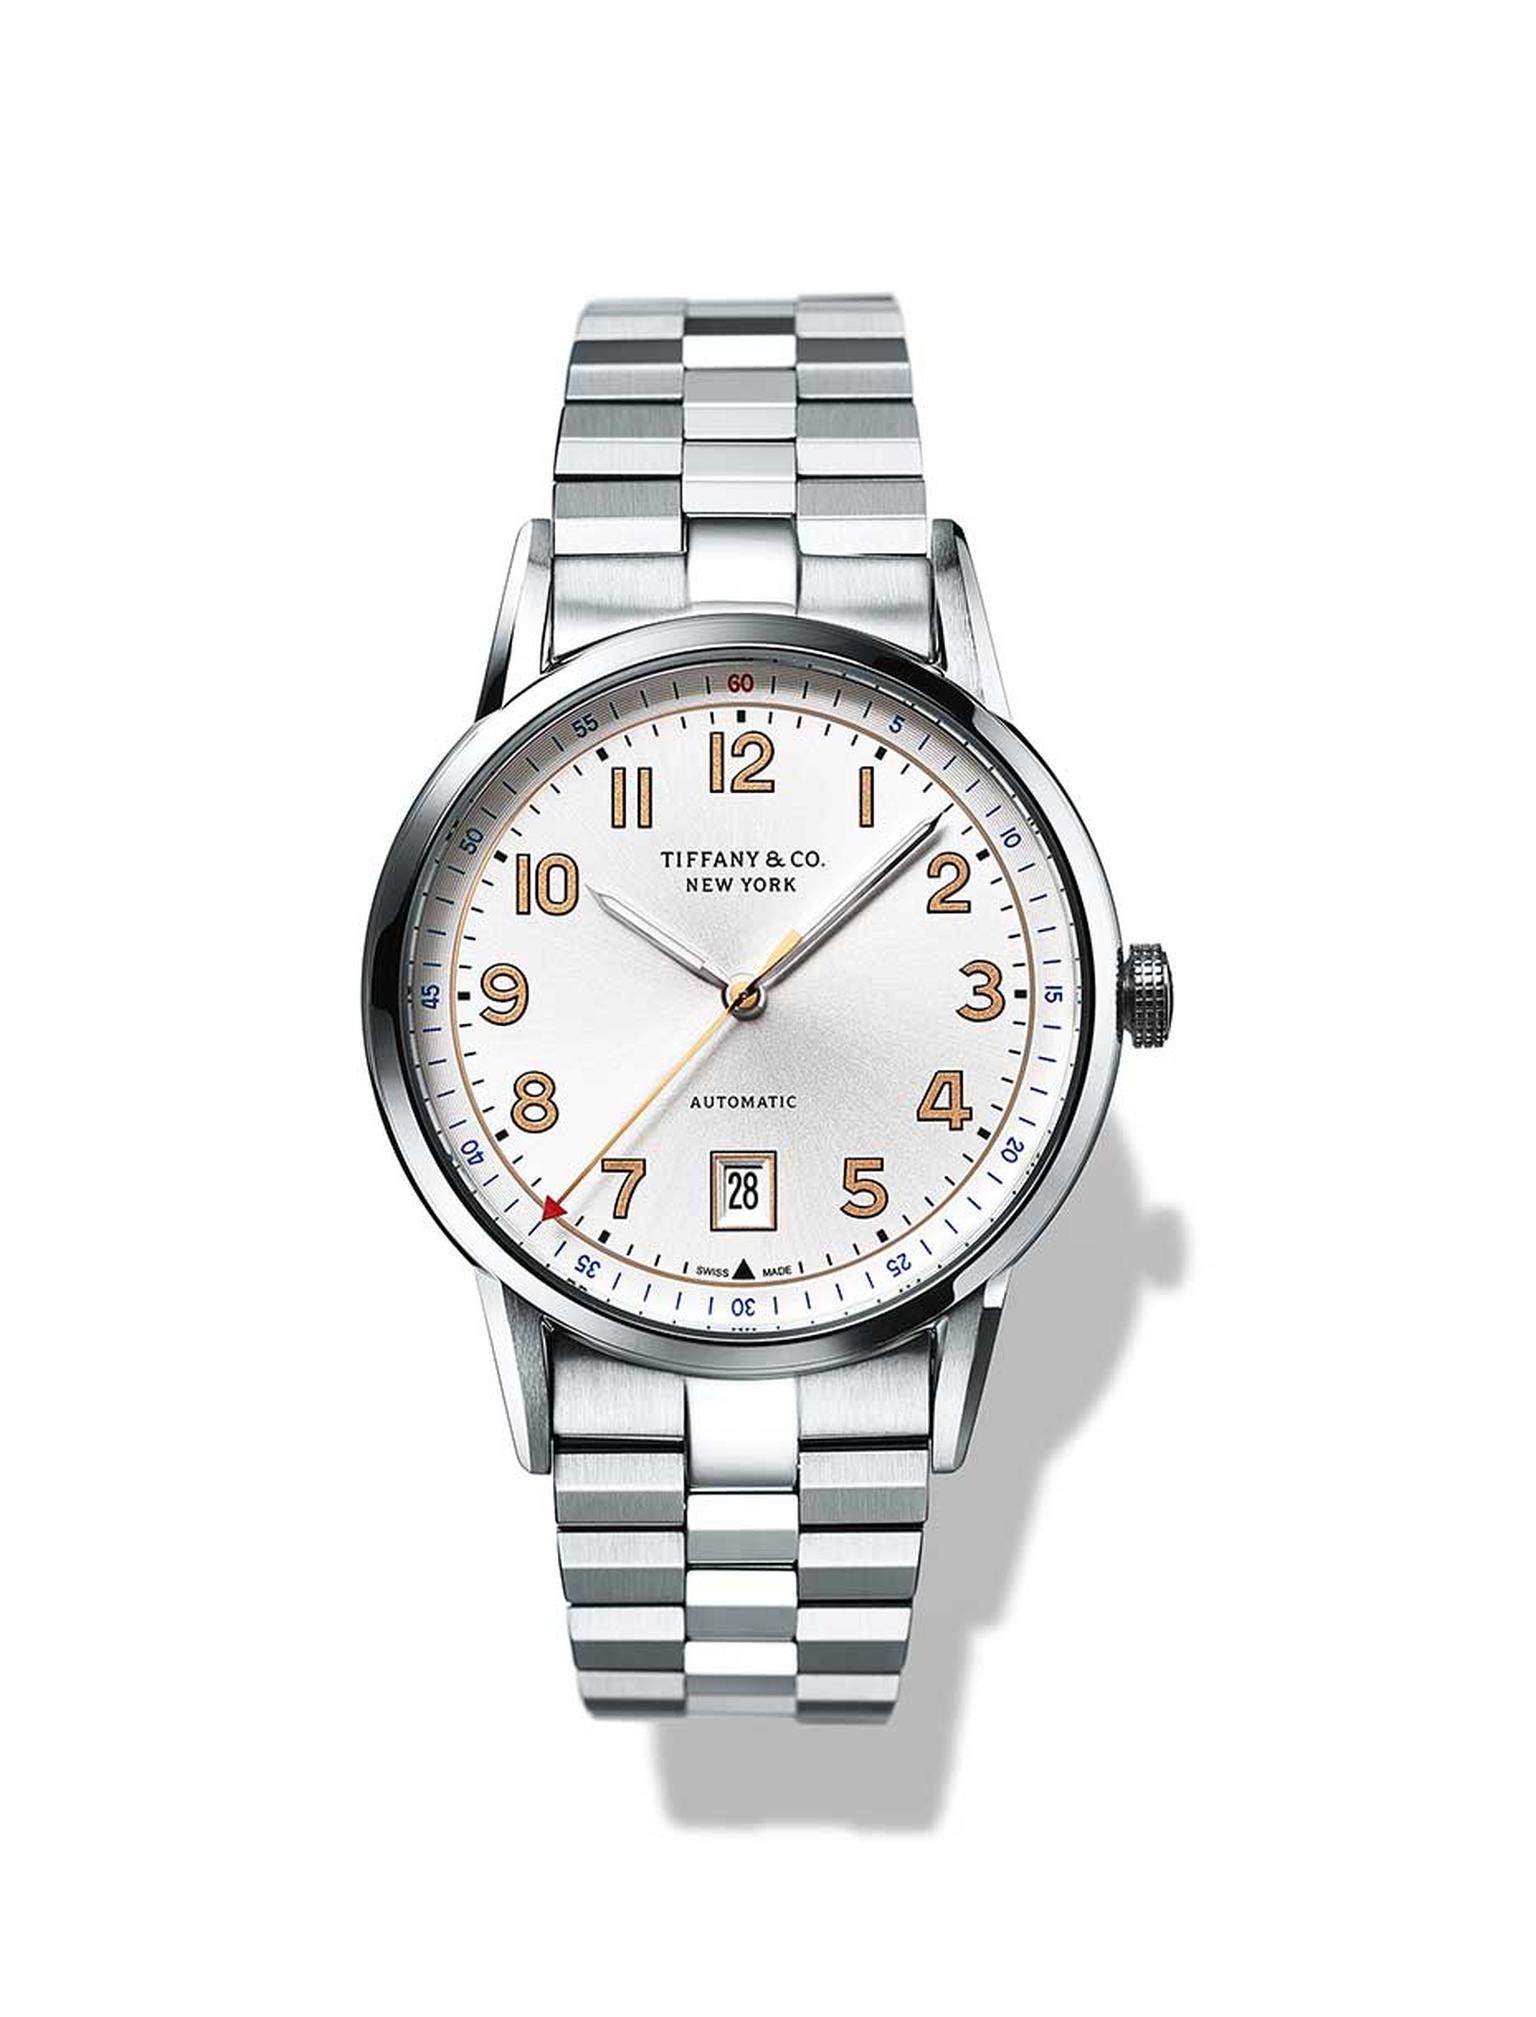 Tiffany and Co. CT60 3-Hand watch with a 40mm stainless steel case, white sunray dial and date window at 6 o'clock.